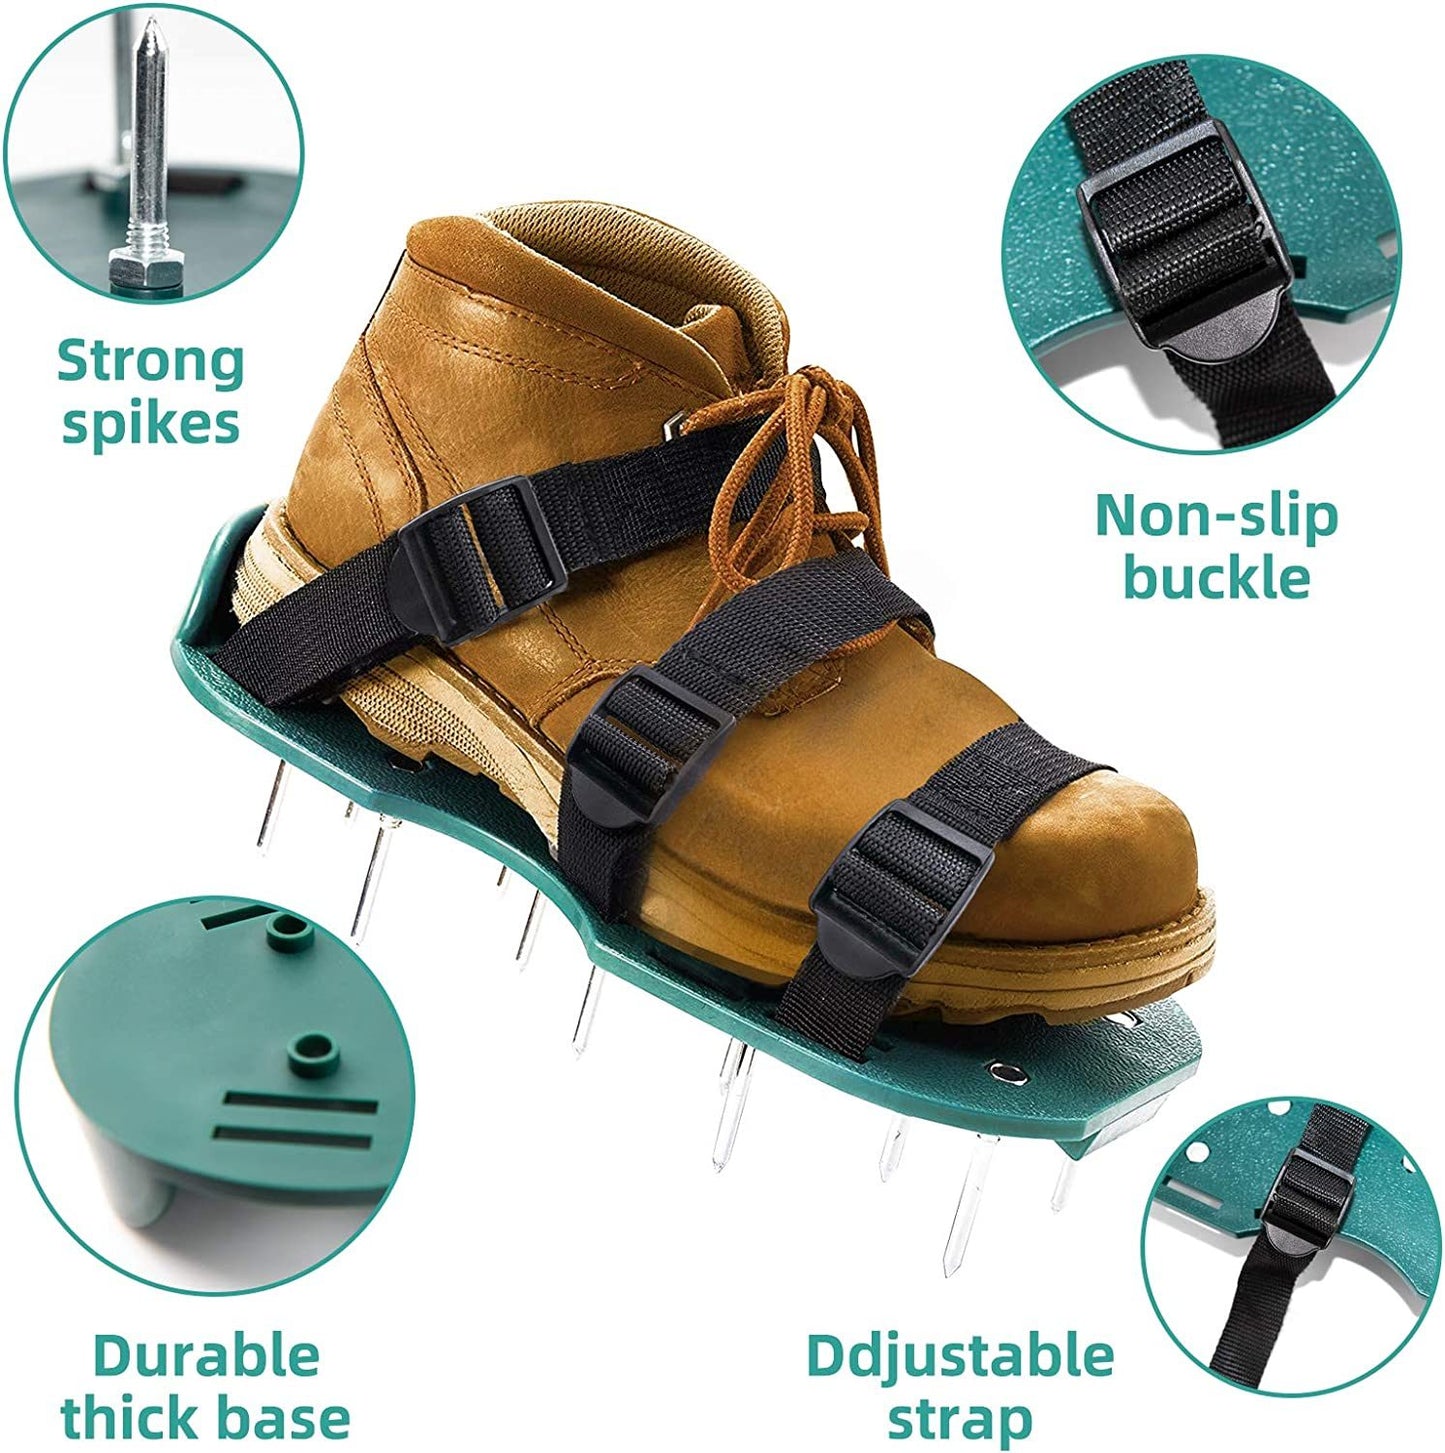 DUCHIFAD Lawn Aerator Shoes, Metal Spike Sandals for Aerating Lawn Soil, One-Size-Fits-All, Pre-Assembled Grass Aerator Tools for Yard Lawn